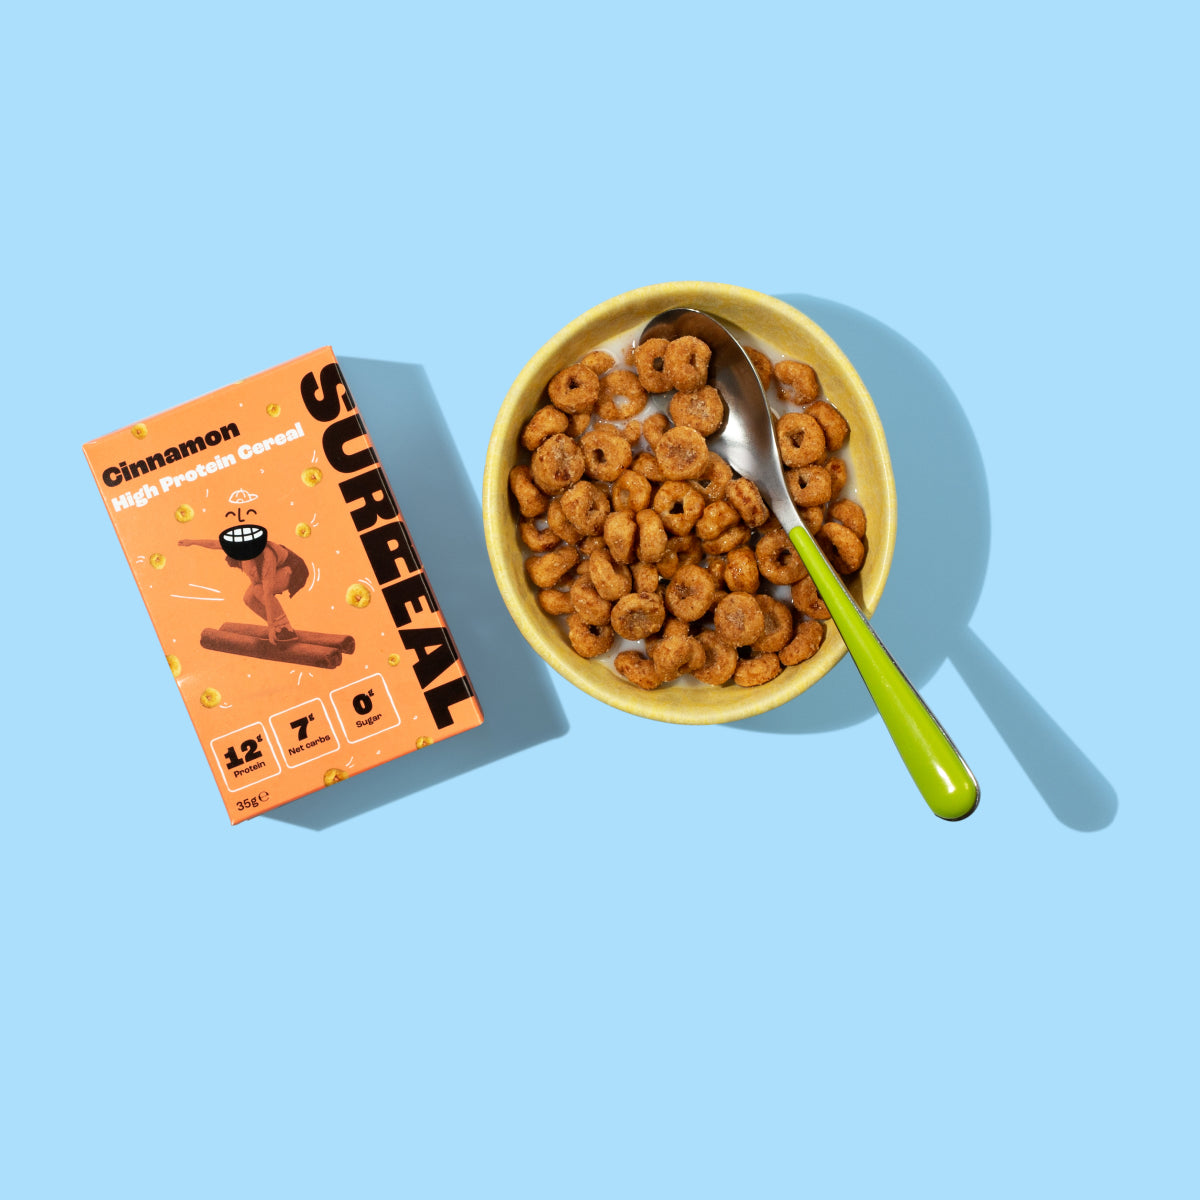 Surreal High Protein Cereal Cinnamon Flavour - 35g